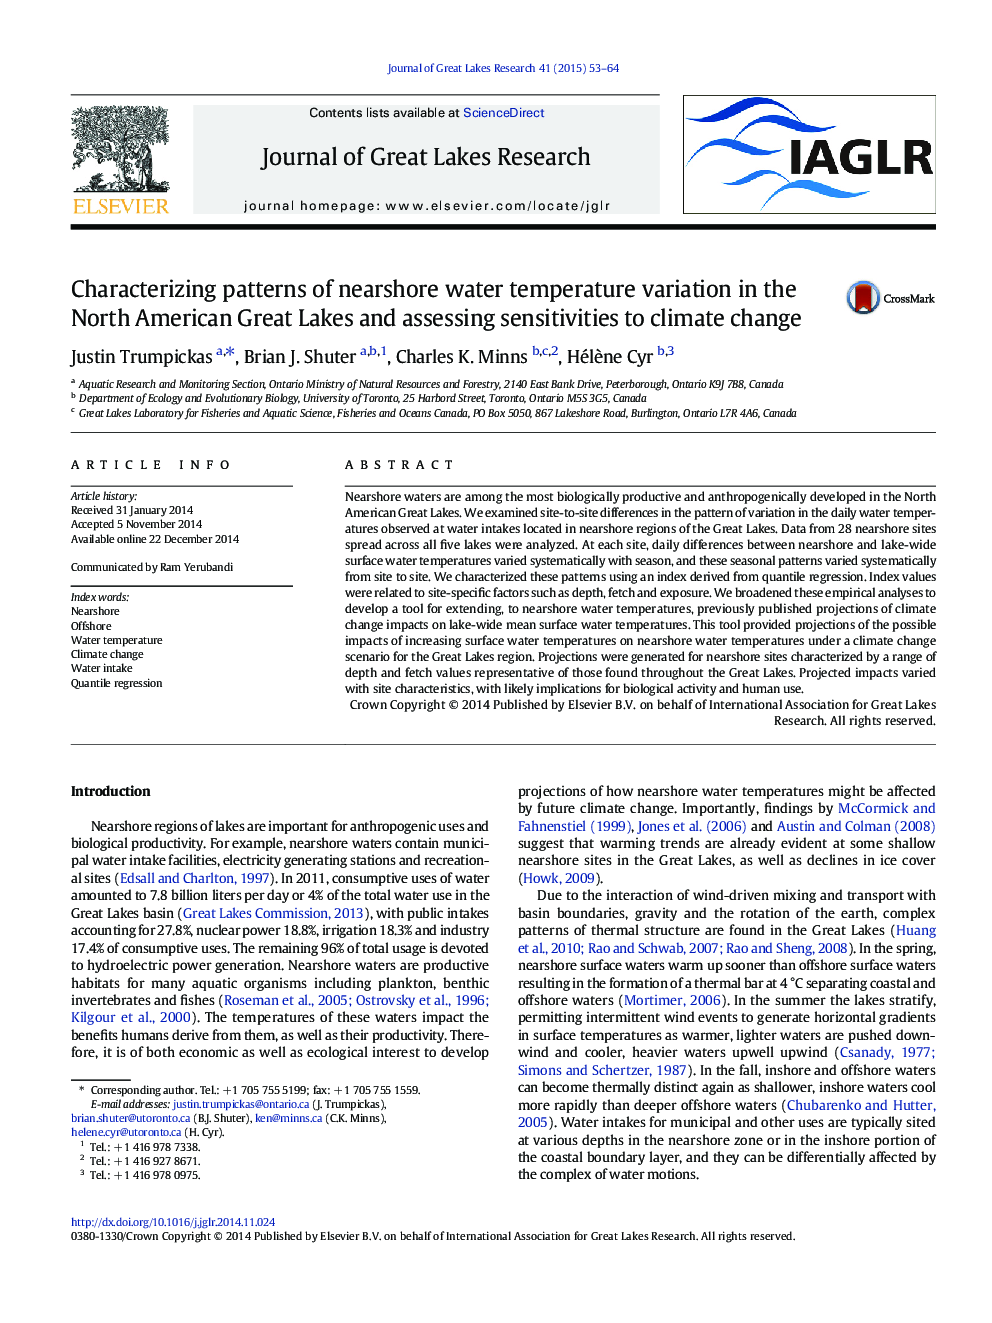 Characterizing patterns of nearshore water temperature variation in the North American Great Lakes and assessing sensitivities to climate change